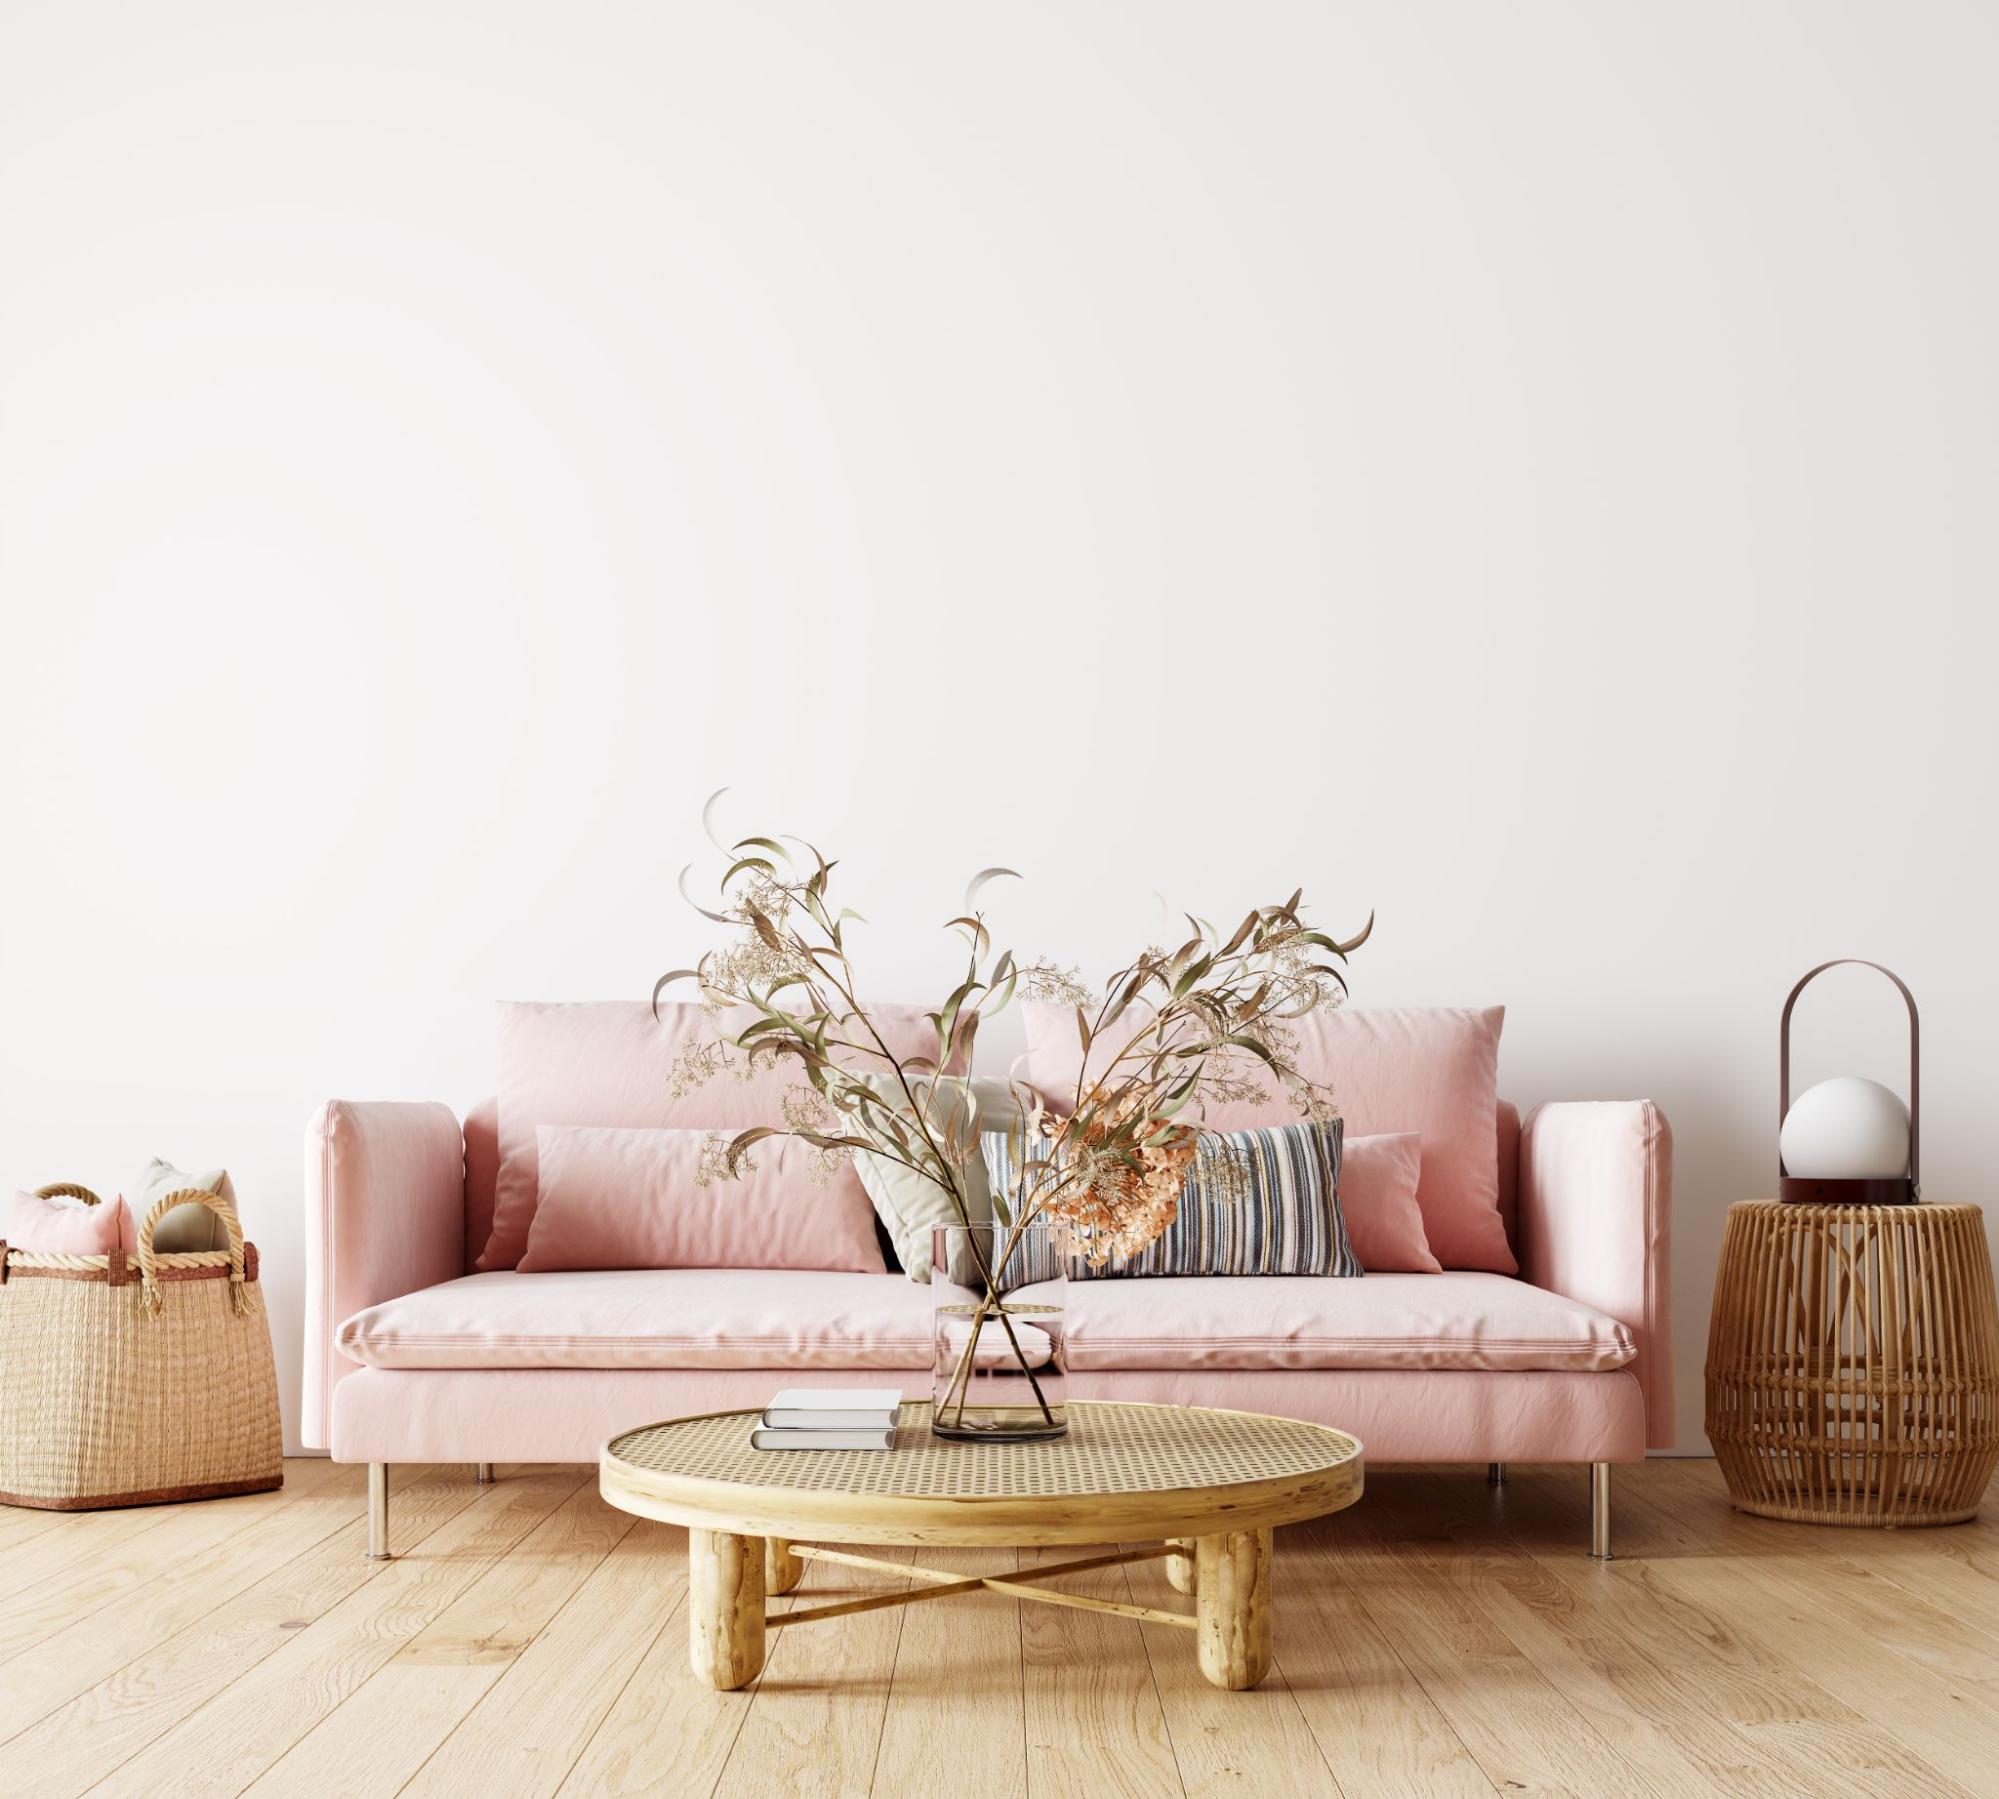 This pale pink couch demonstrates one of our favorite unconventional fall home decor trends: blush!